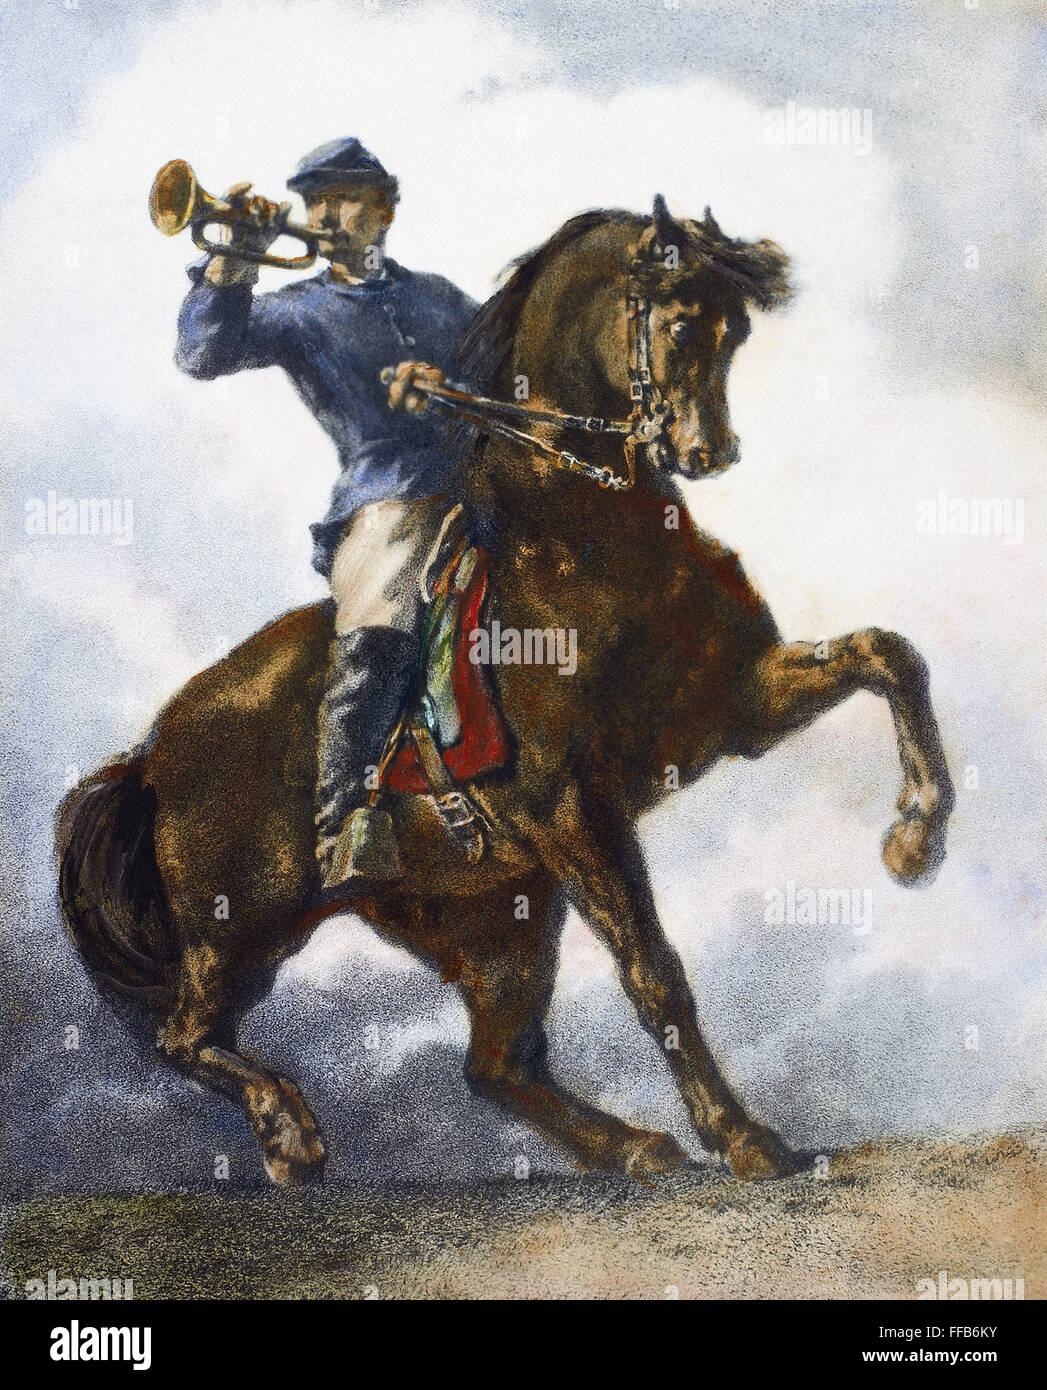 CIVIL WAR: BUGLER, 1863. /nA Union Army bugler during the American Civil War. Lithograph, 1863, after a painting by William Morris Hunt (1824-1879). Stock Photo